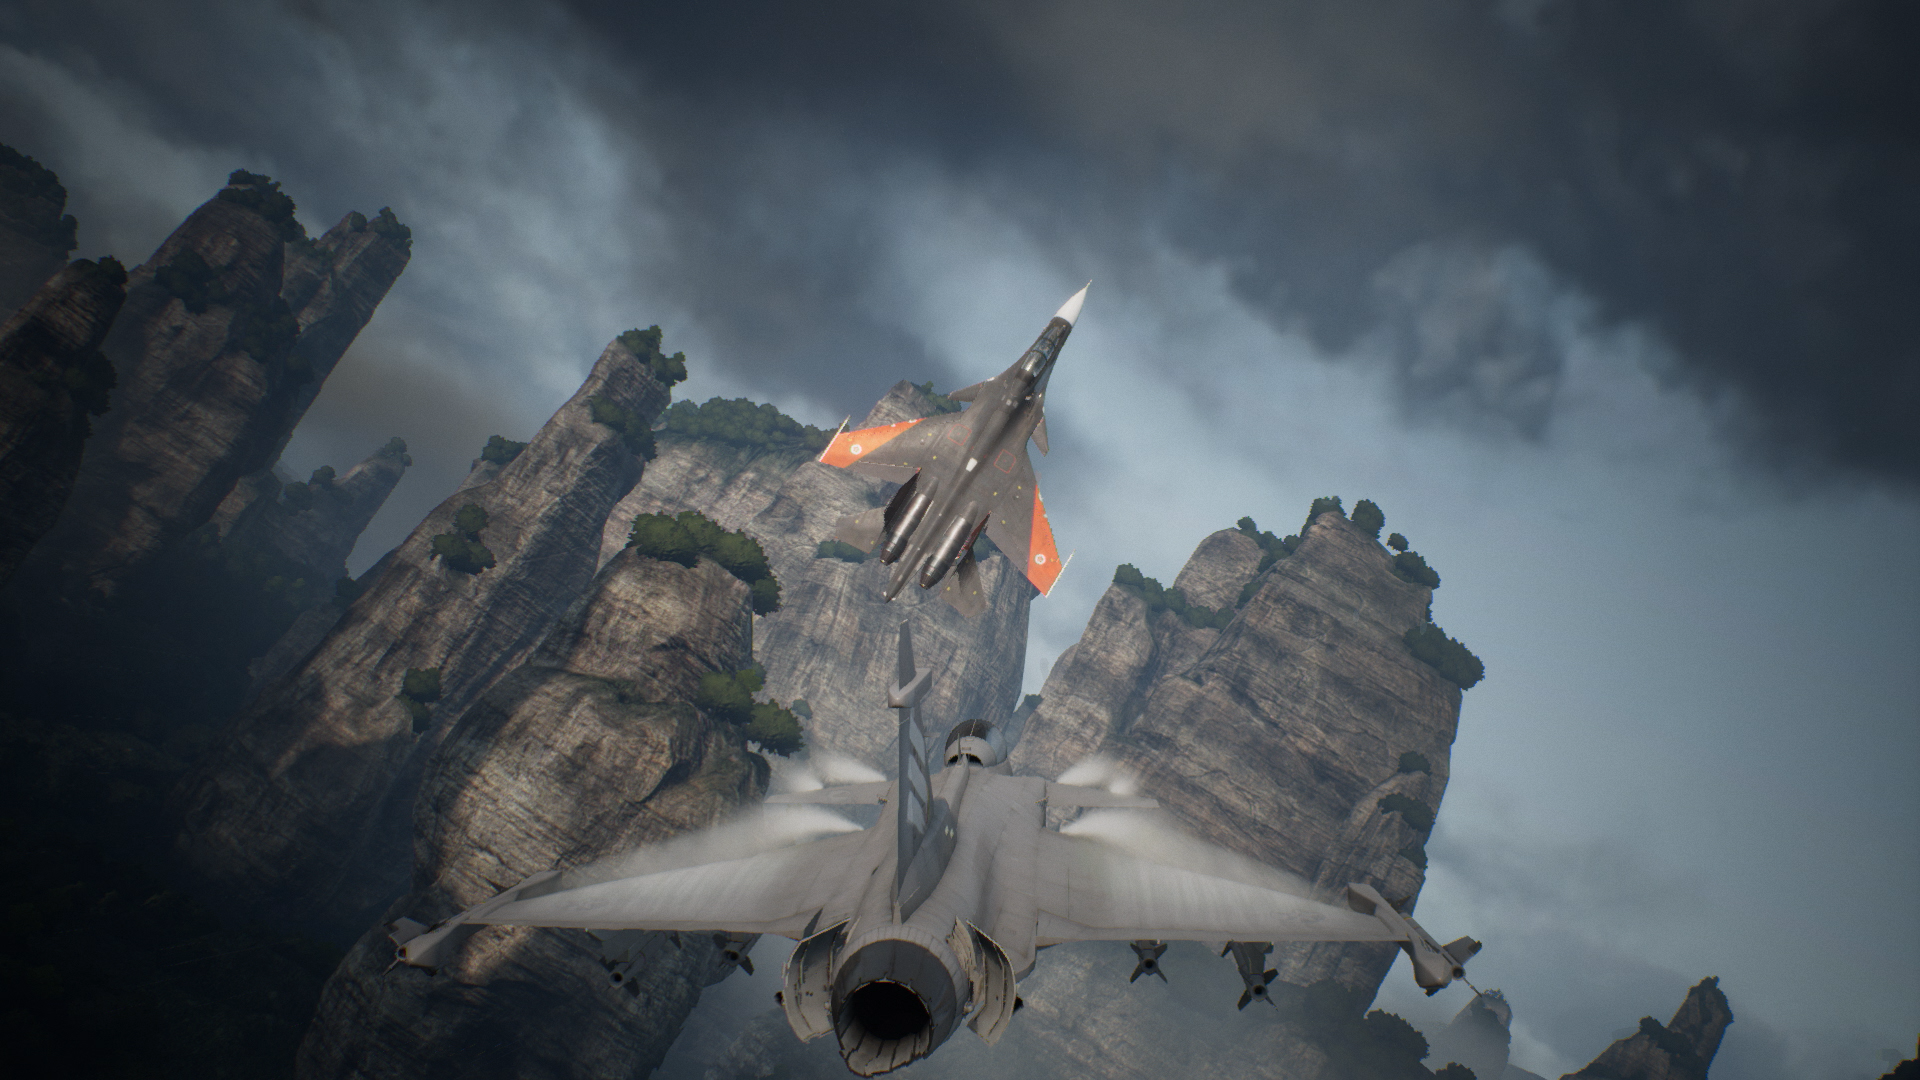 Ace Combat 7 Skies Unknown Pc System Requirements Revealed And 4k